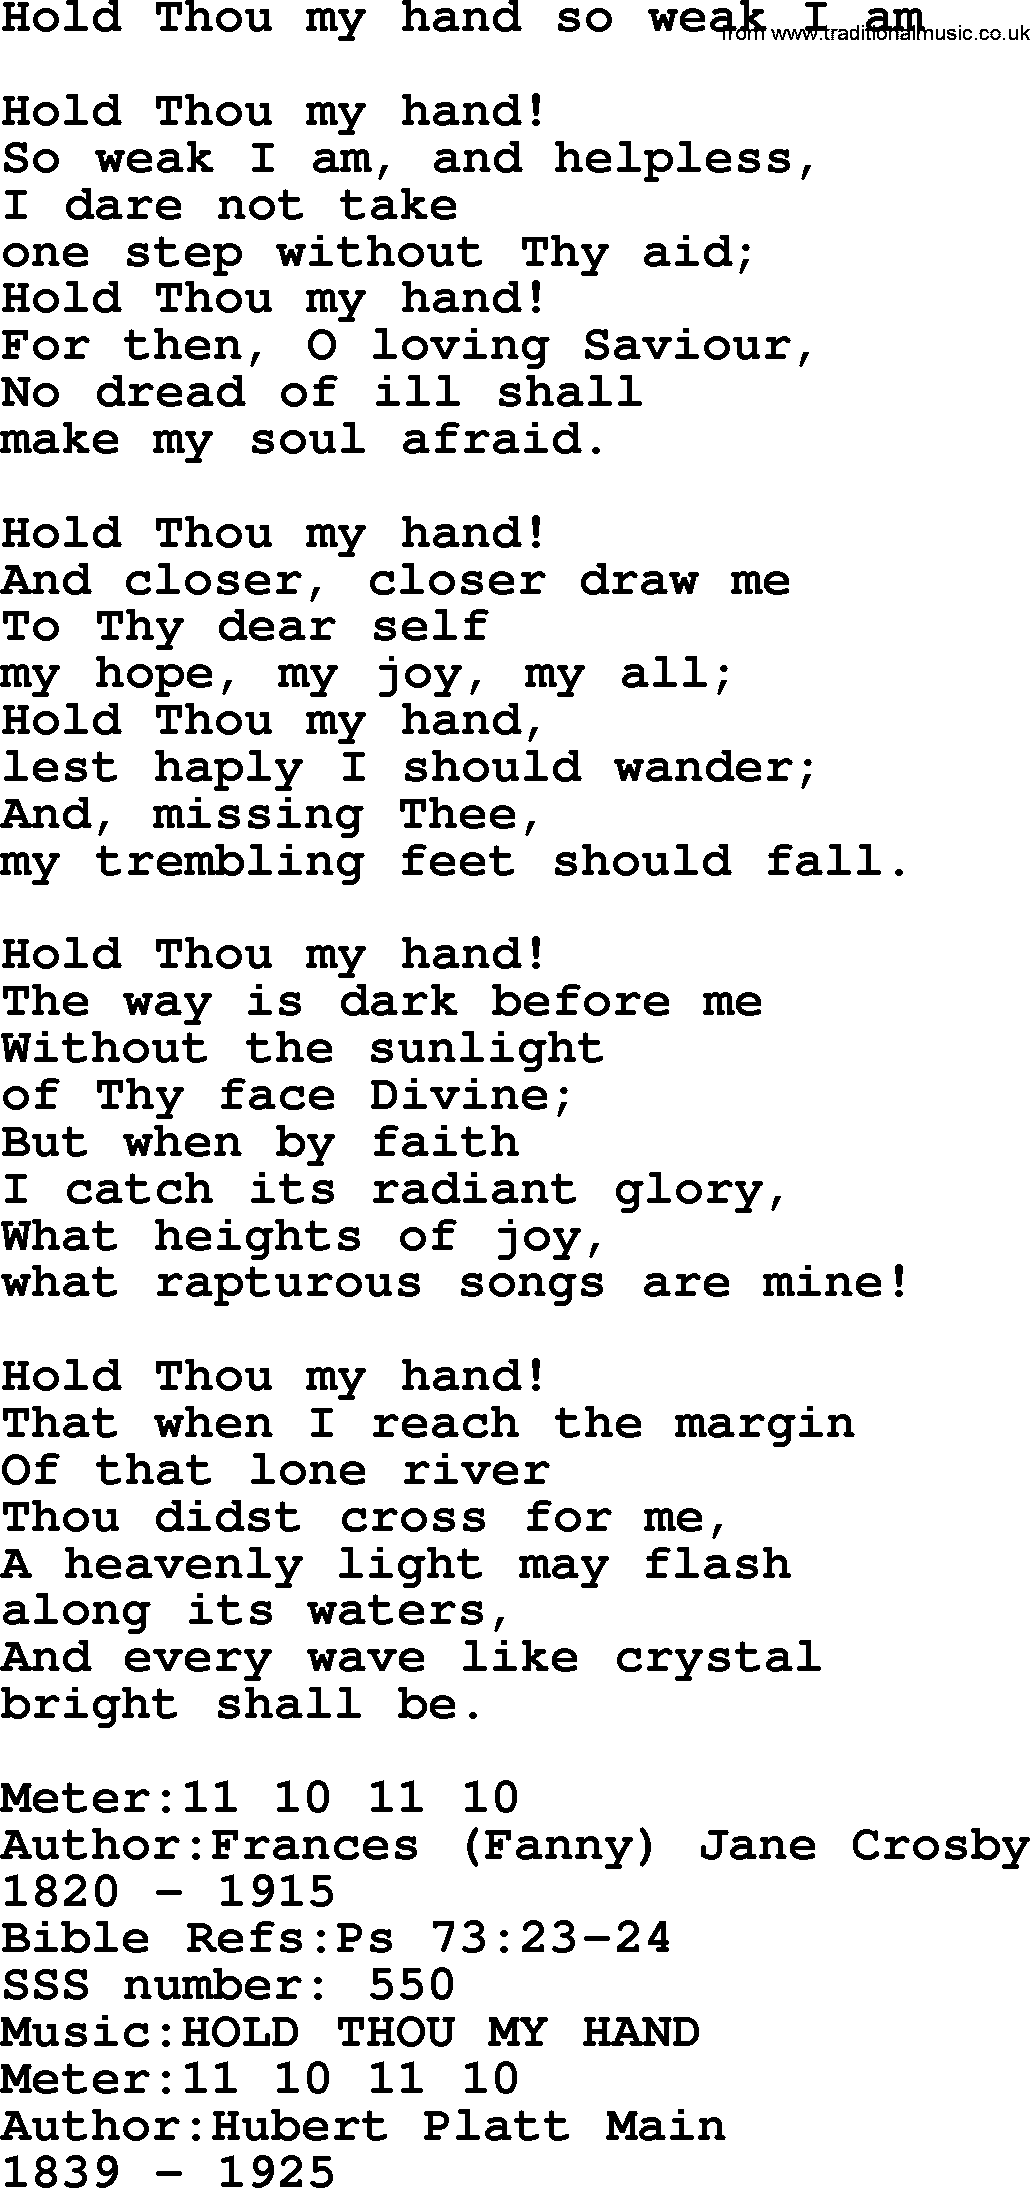 Sacred Songs and Solos complete, 1200 Hymns, title: Hold Thou My Hand So Weak I Am, lyrics and PDF